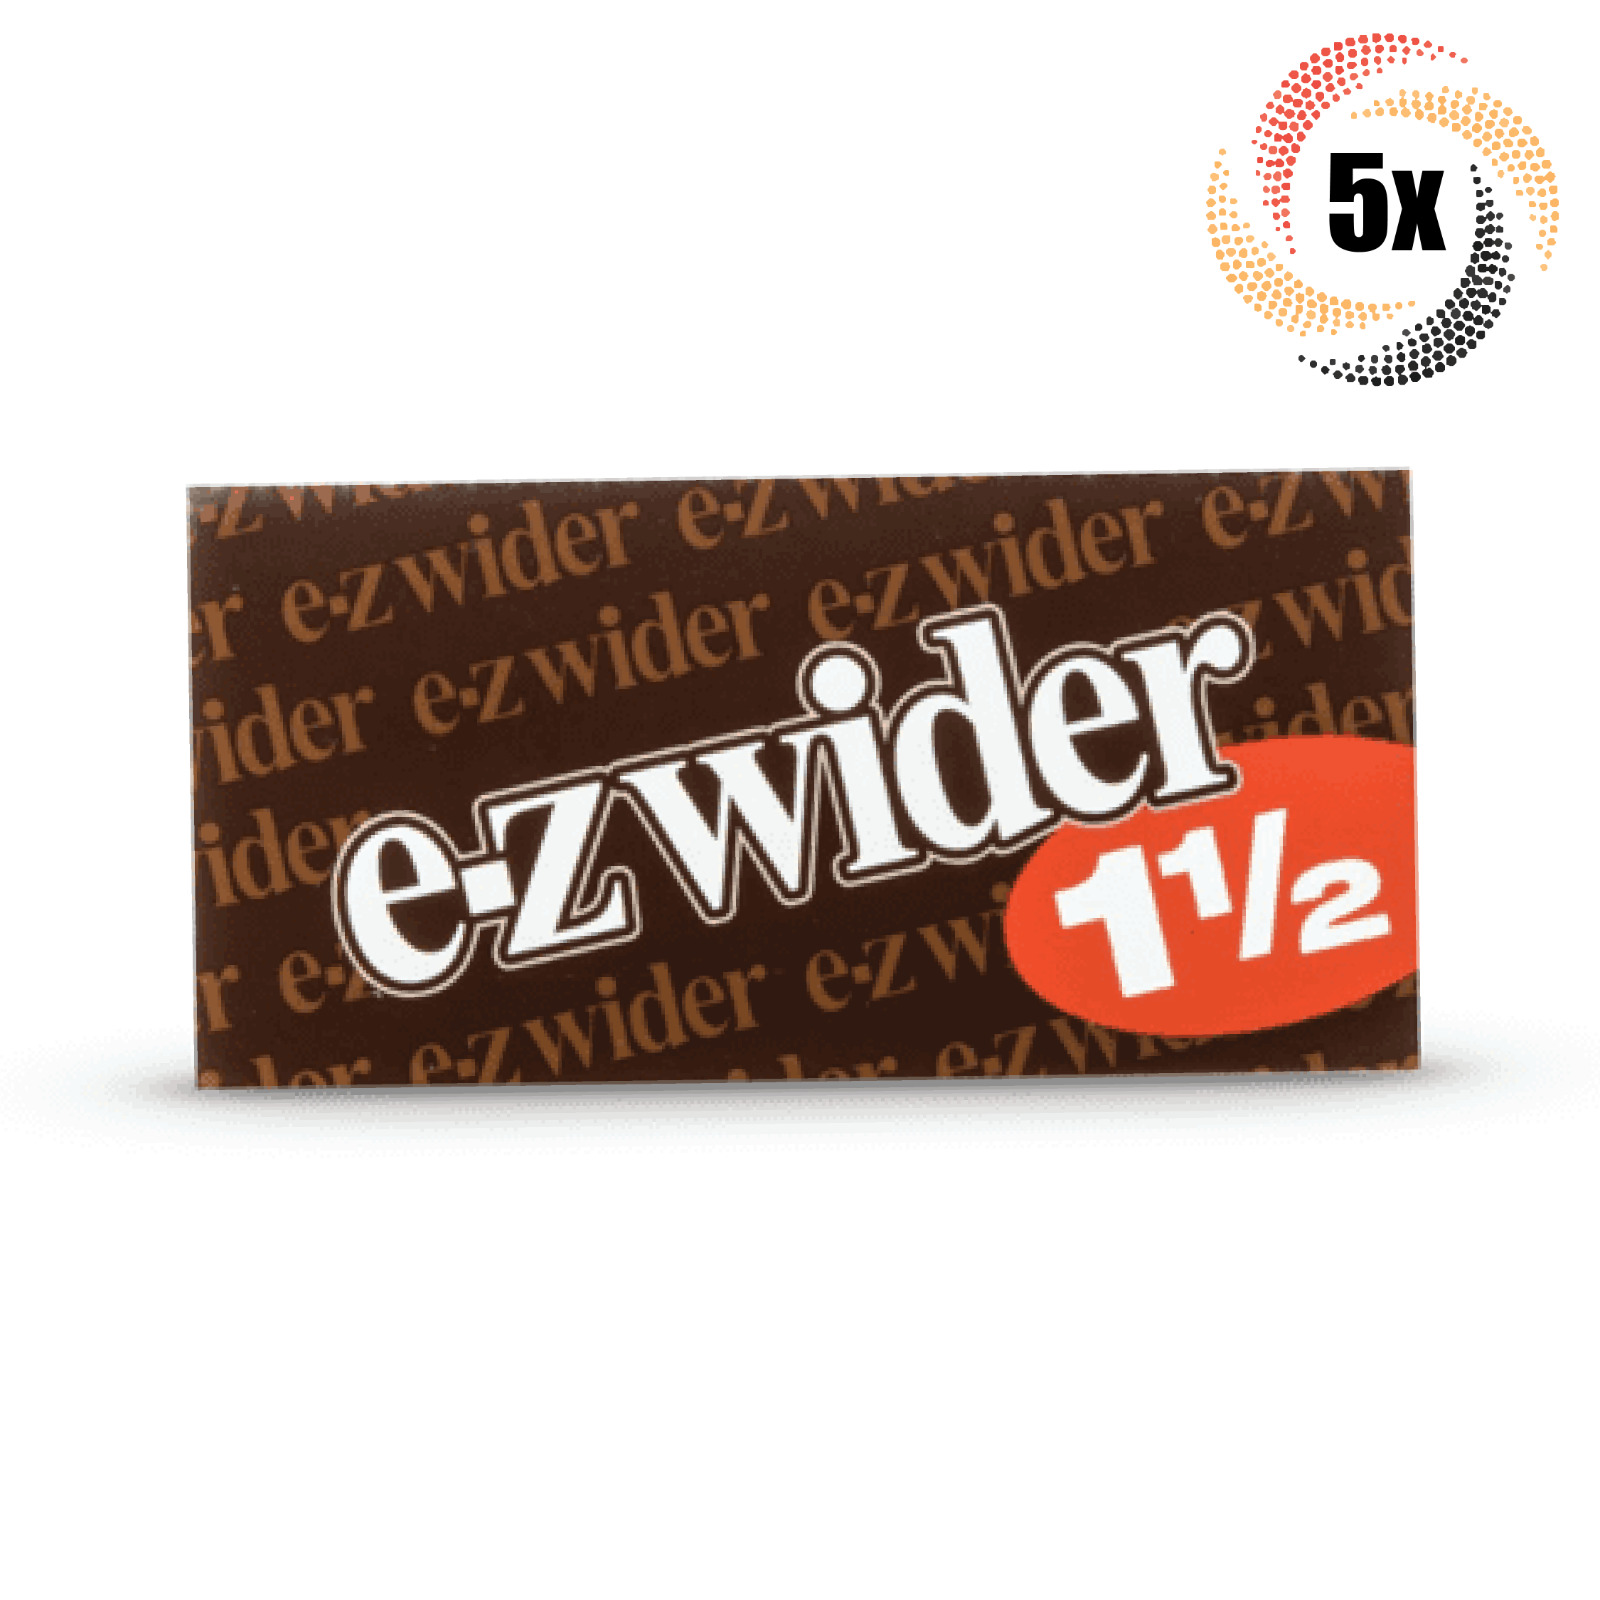 5x Packs E-Z Wider | 1 1/2 1.5 | 24 Papers Per Pack | + 2 Free Rolling Tubes